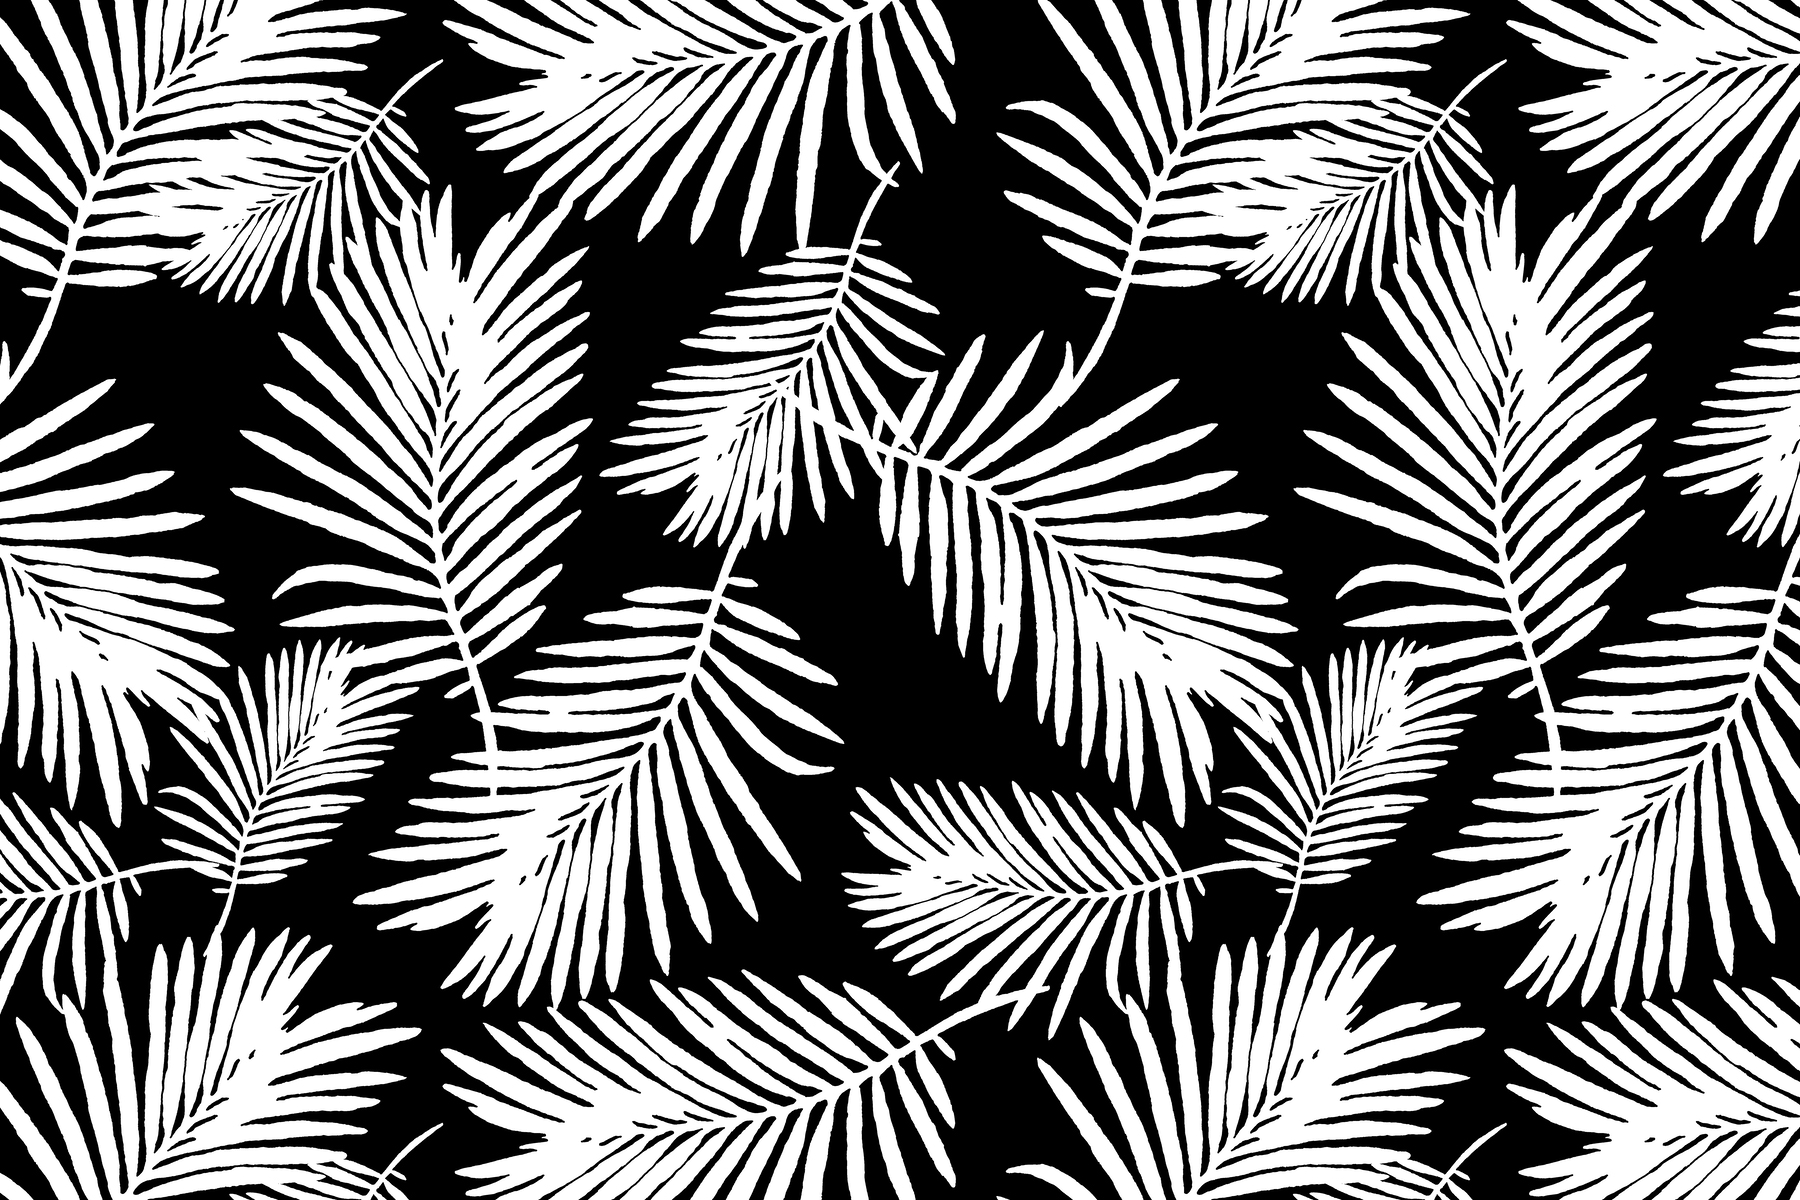 Tropical Wallpaper | Black and White Palm Leaf Design | Happywall